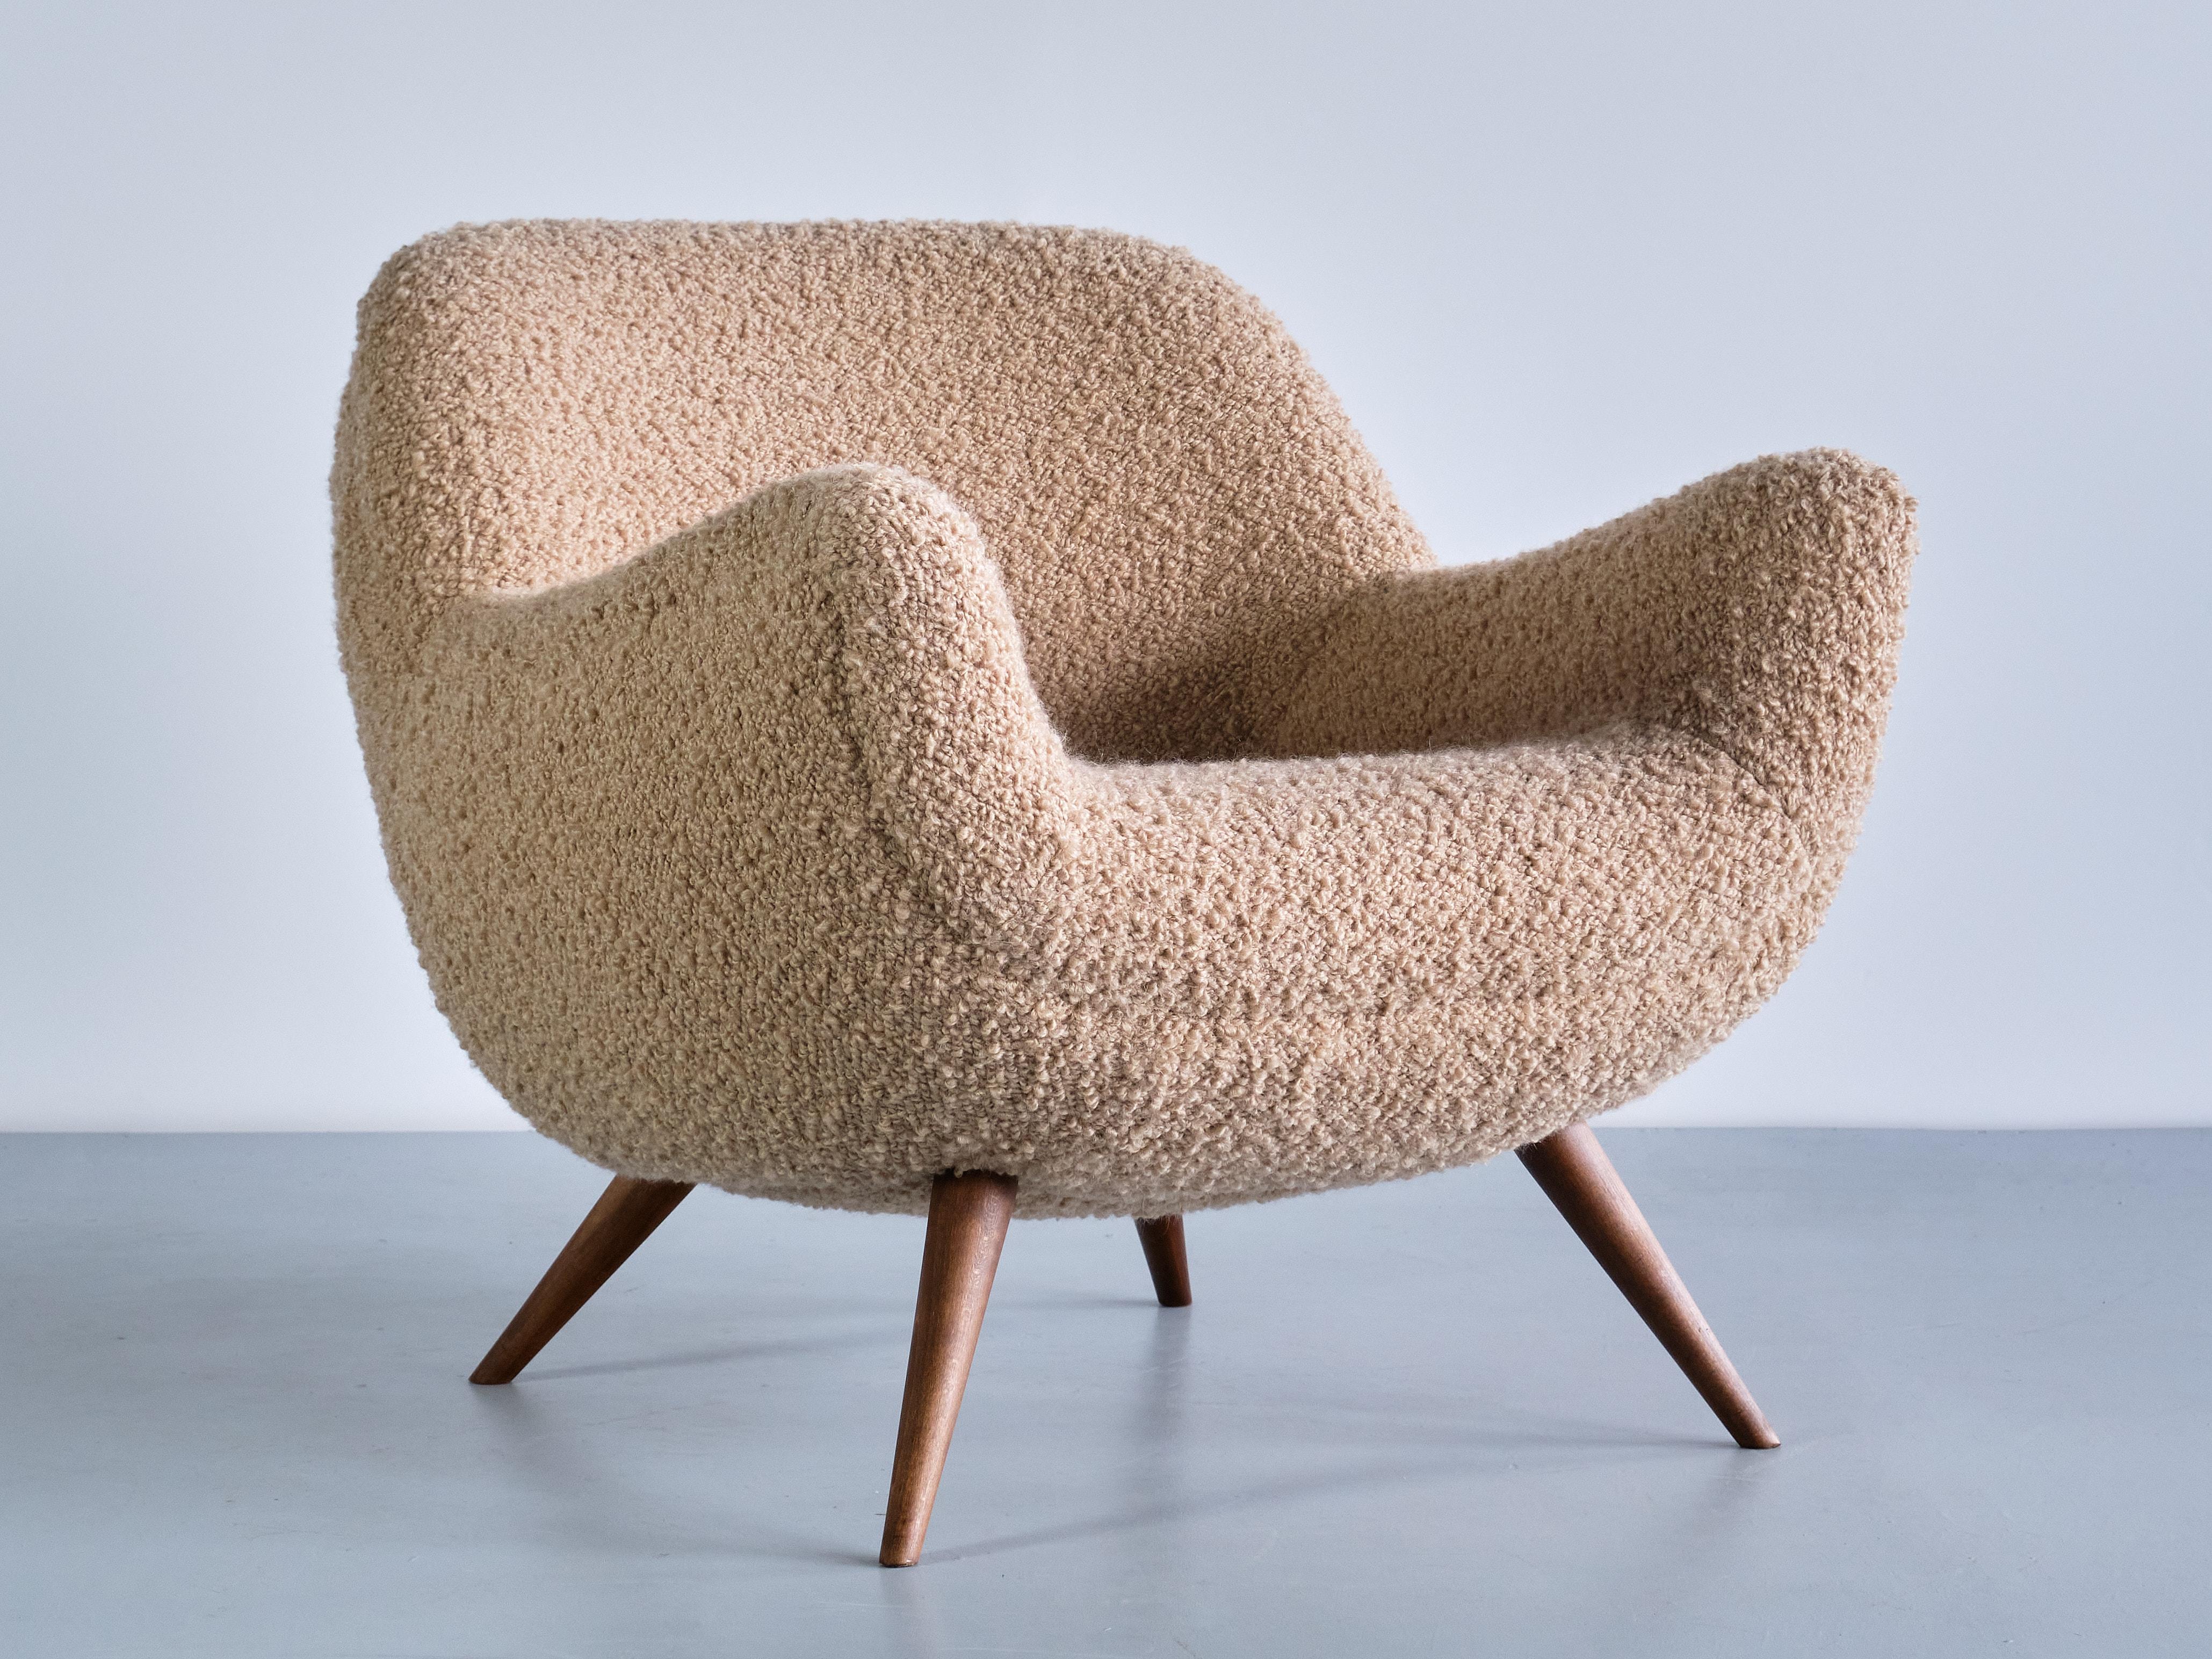 This extremely rare armchair was designed by Gustav Bergmann and produced by his company in Lippe, Germany in the early 1960s. The organic and round lines of the design give the chair a striking and inviting appearance. The seat and armrests are